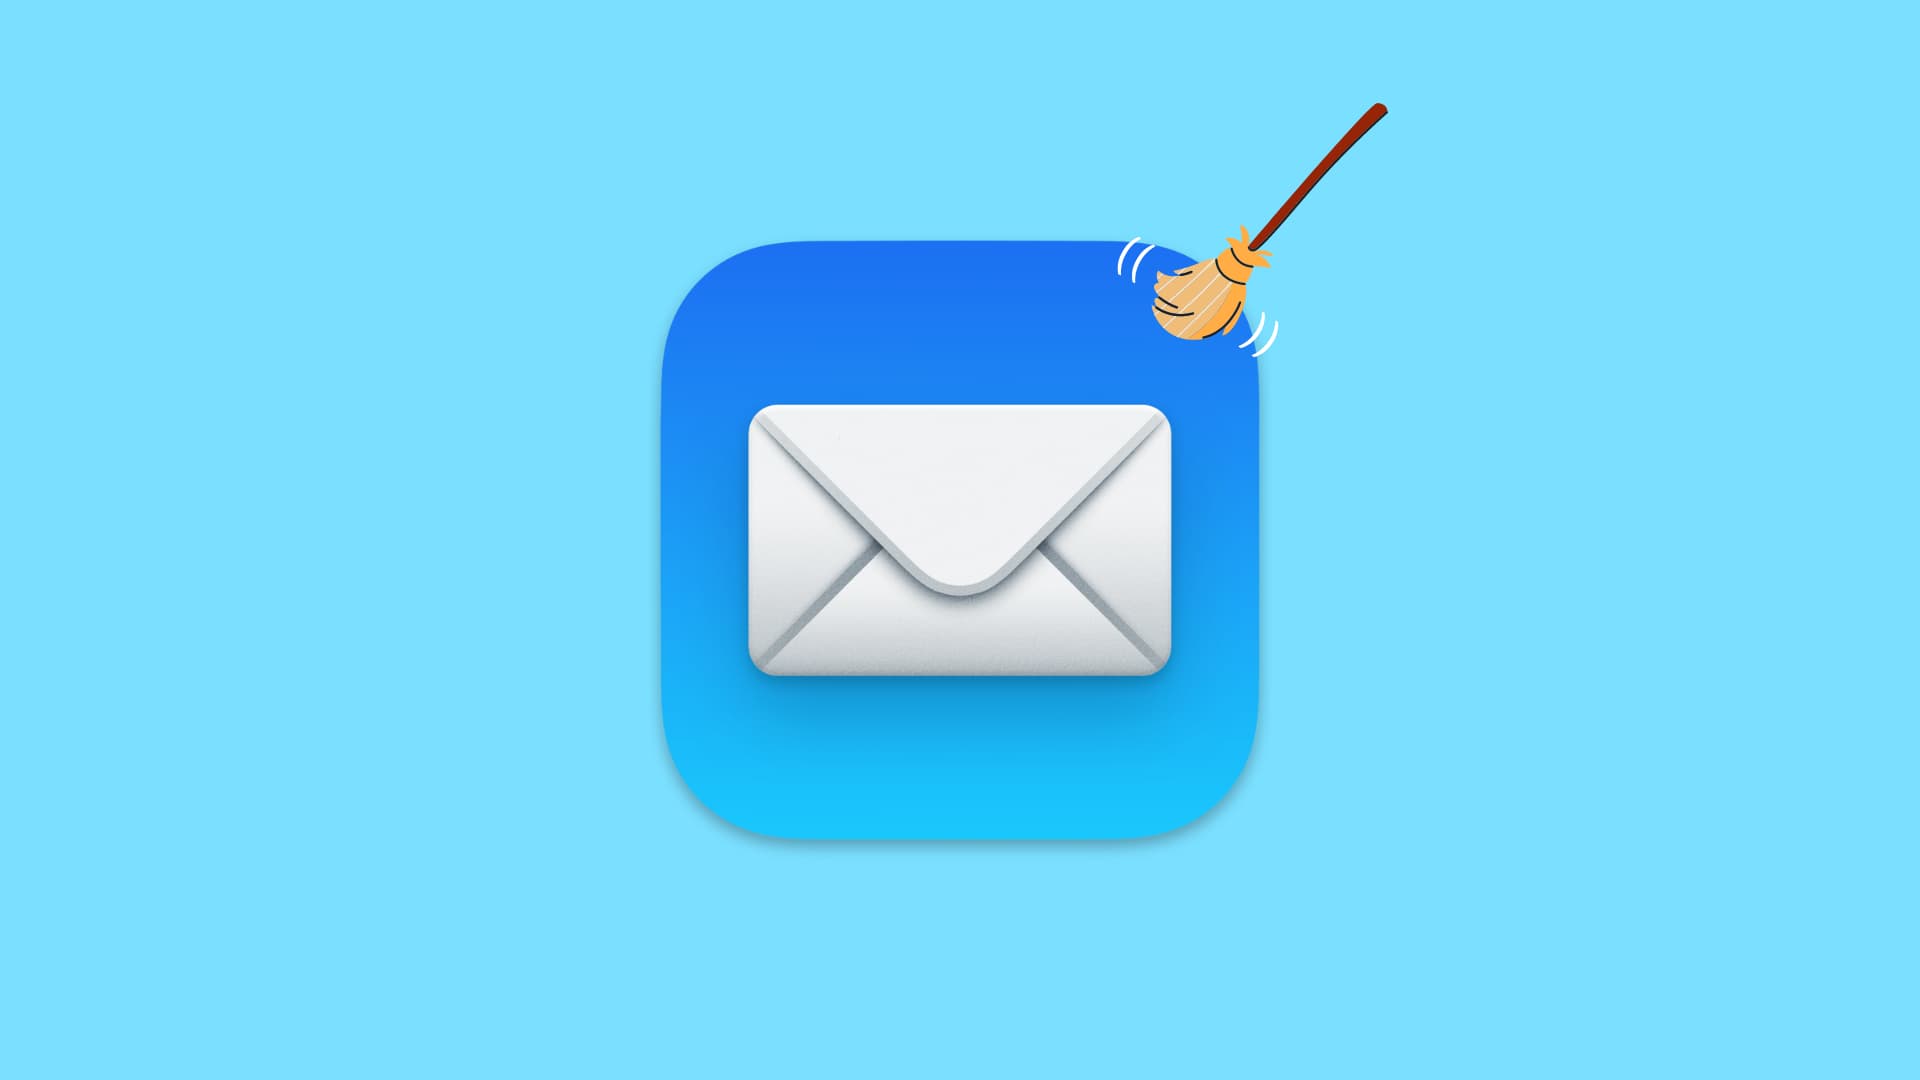 Apple Mail app with a broom on top that signifies cleaning old email attachments